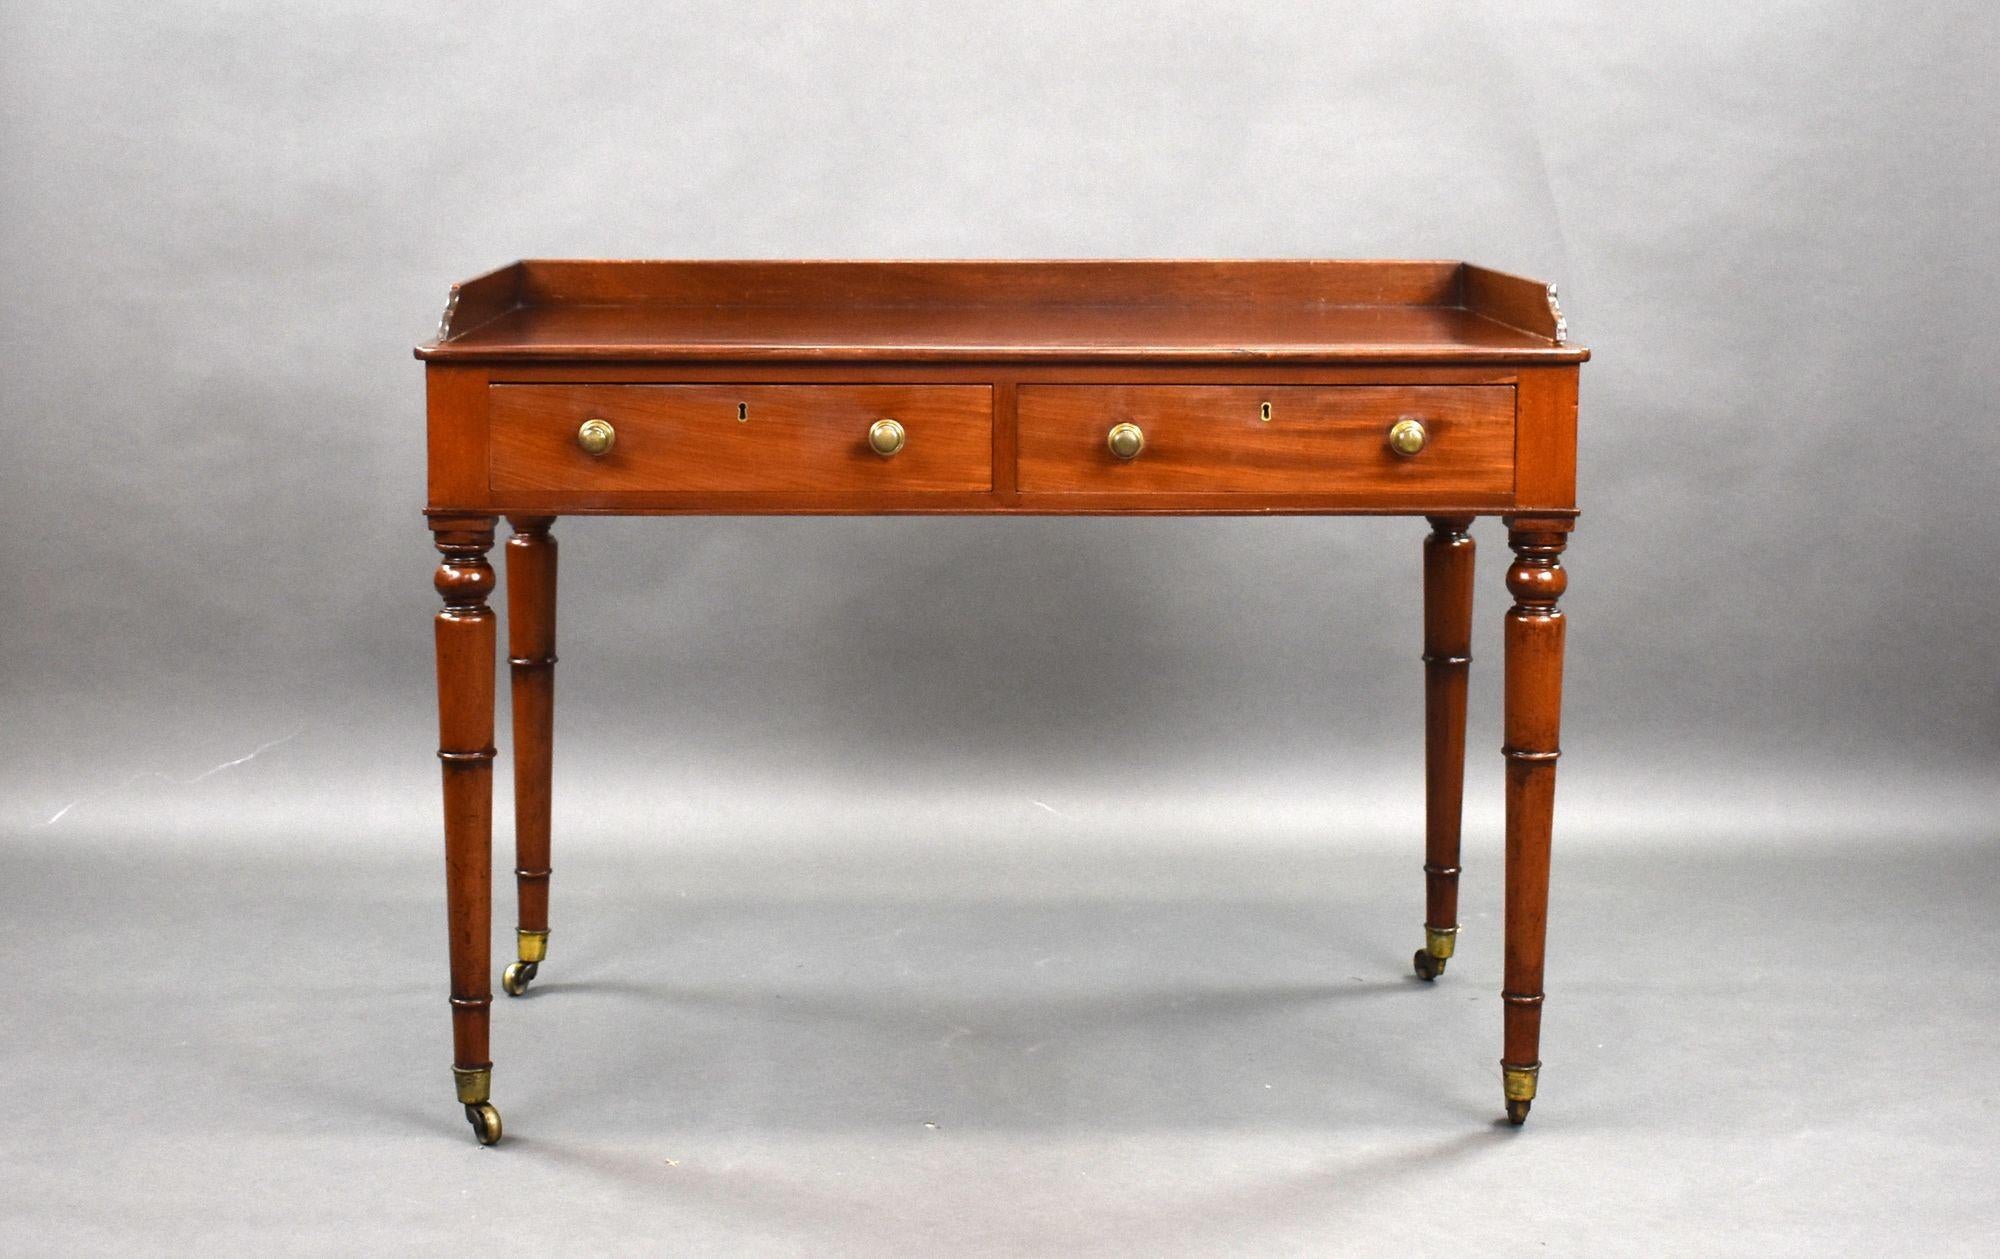 For sale is a good quality Victorian mahogany writing table, having a galleried top, above two oak lined drawers with fine hand cut dovetails and brass handles. Standing on elegant turned legs, terminating on fine brass castors, this table remains